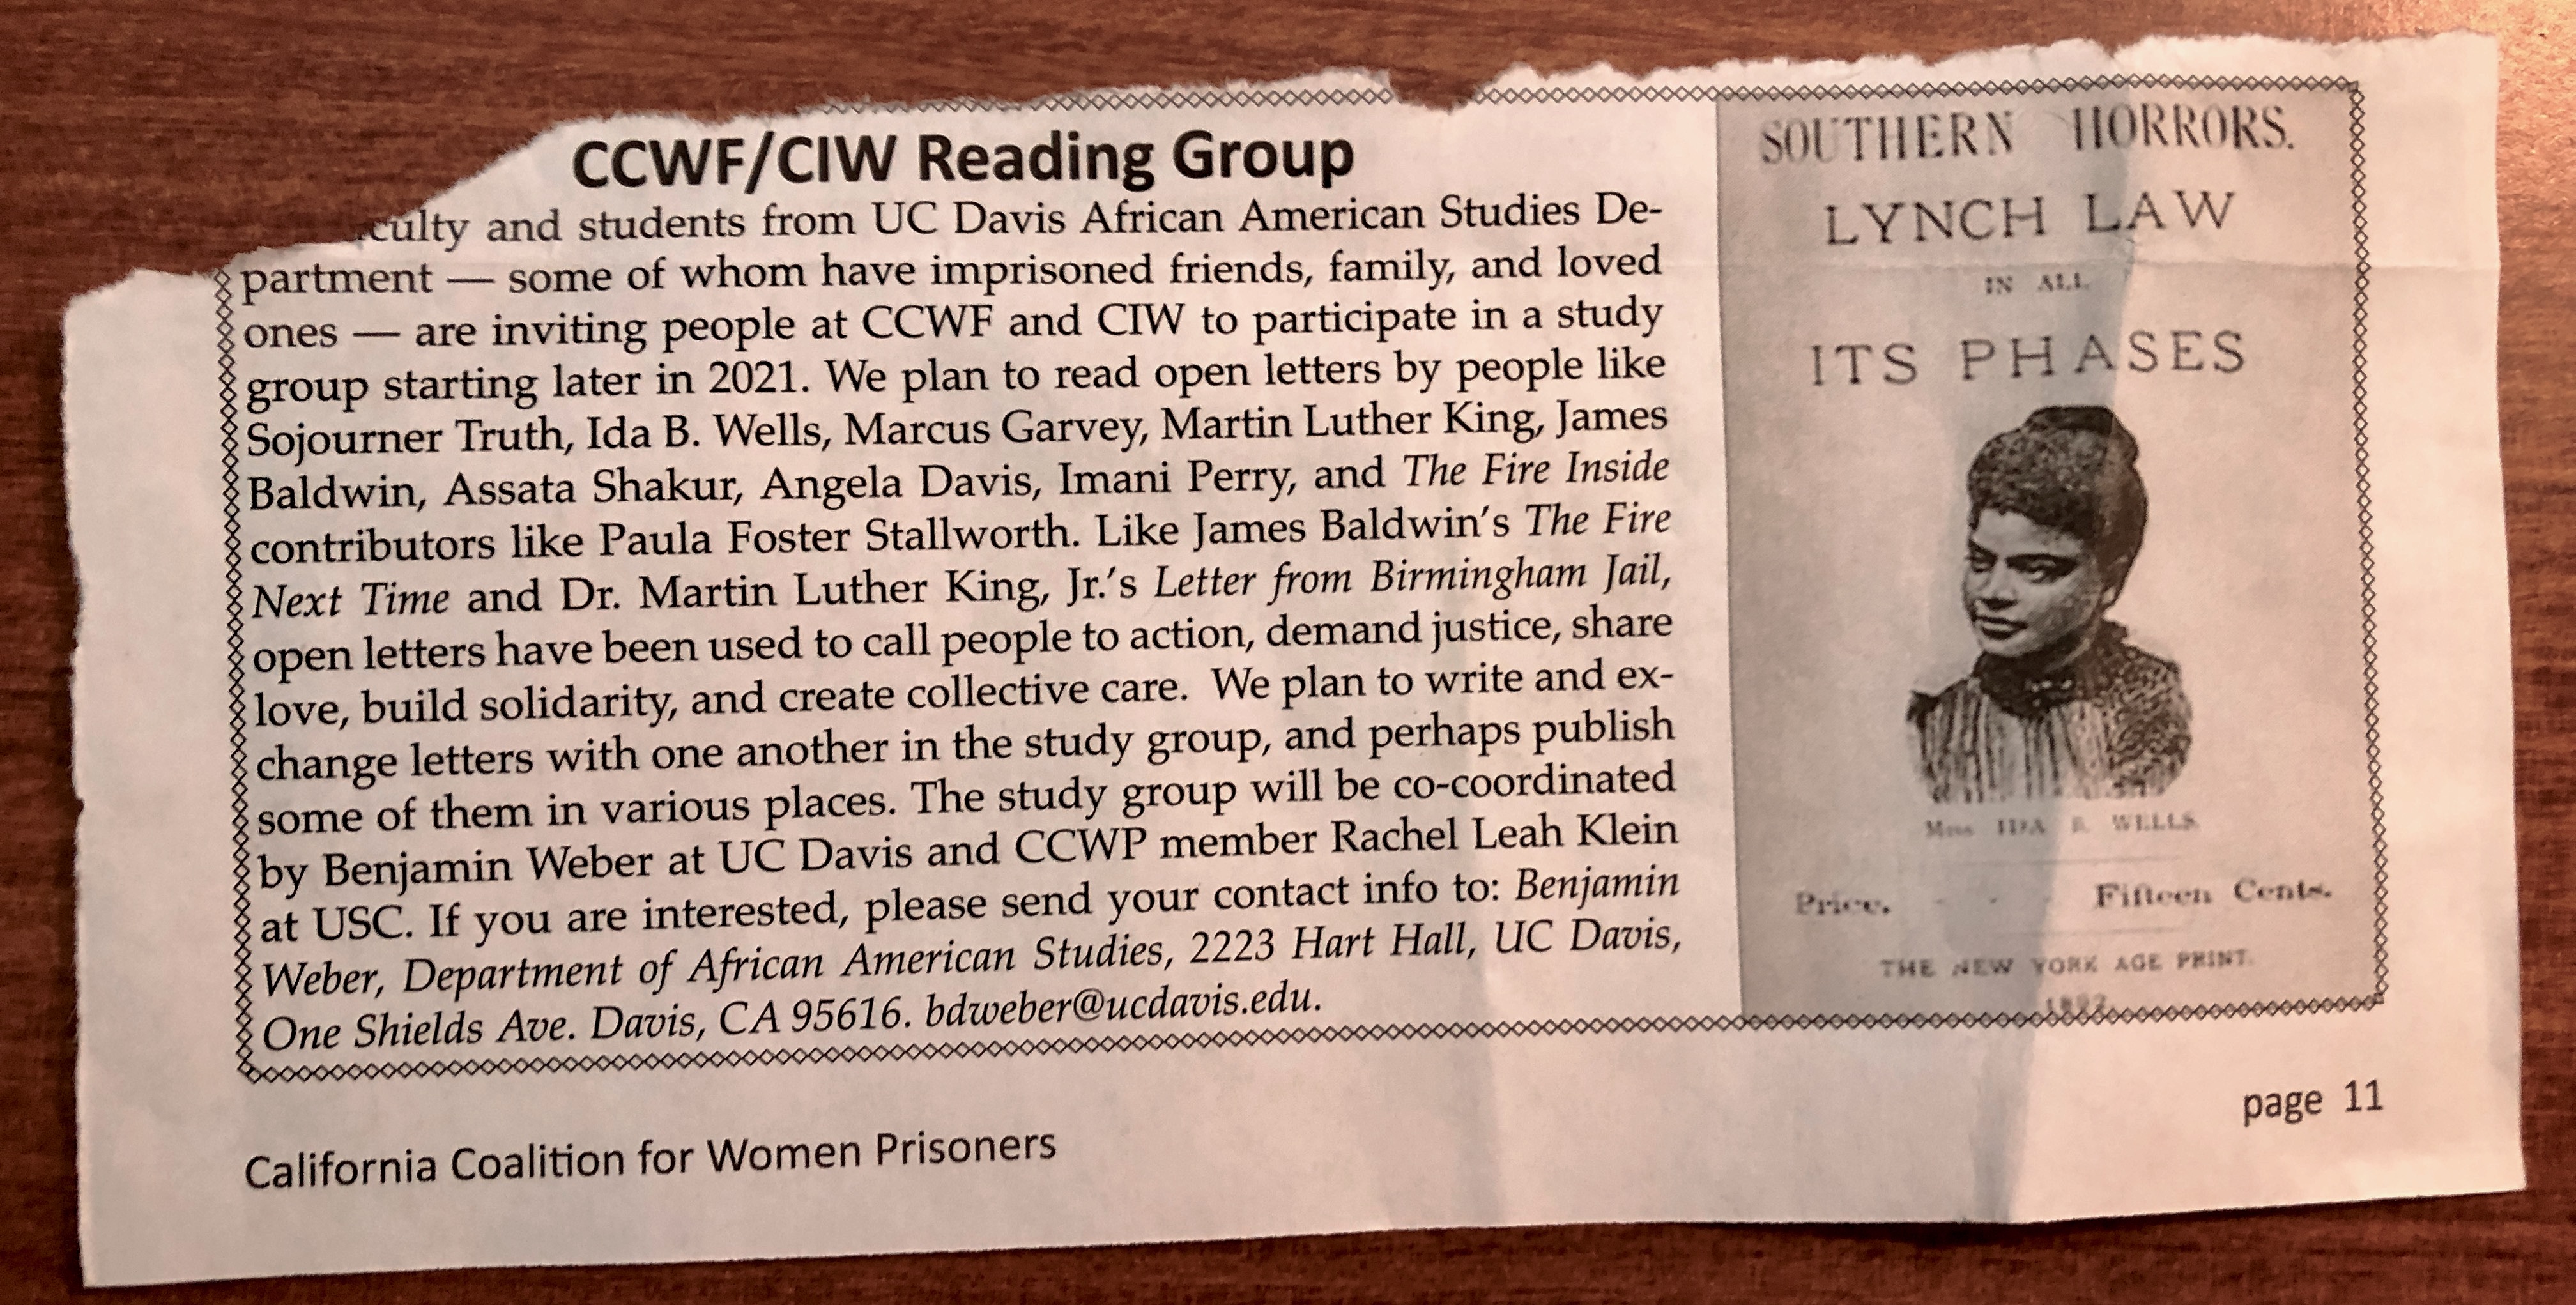 Newspaper clipping from the California Coalition for Women Prisoners, page 11. Title reads “CCWF/CIW Reading Group”. On the right hand side is a poster that says “Southern Horror LYNCH LAW IN ALL ITS PHASES.” On the left is a paragraph text  that reads “Faculty and students from UC Davis African American Studies Department — some of whom have imprisoned friends, family, and loved ones—are inviting people at CCWF and CIW to participate in a study group starting later in 2021. We plan to read open letters..."